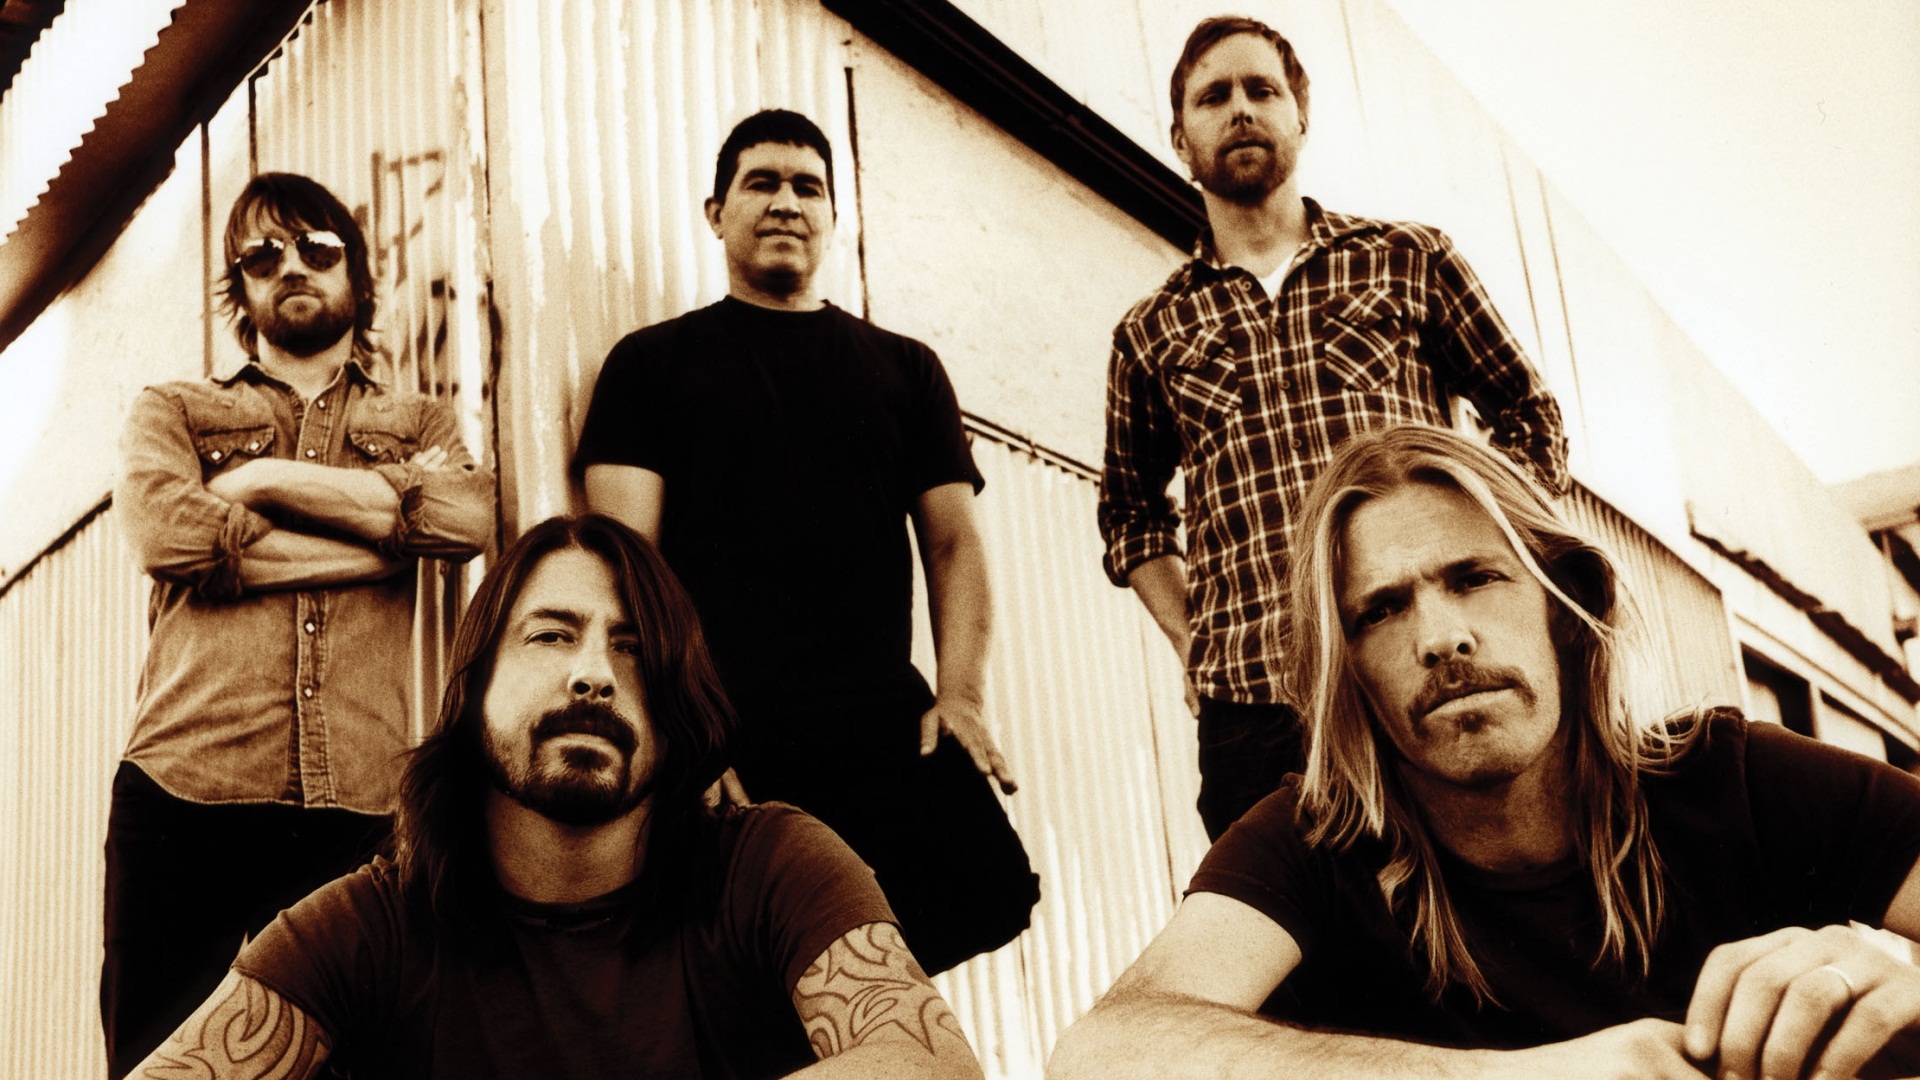 OFFICIAL: Foo Fighters With A New Album And Getting Their Own HBO Show